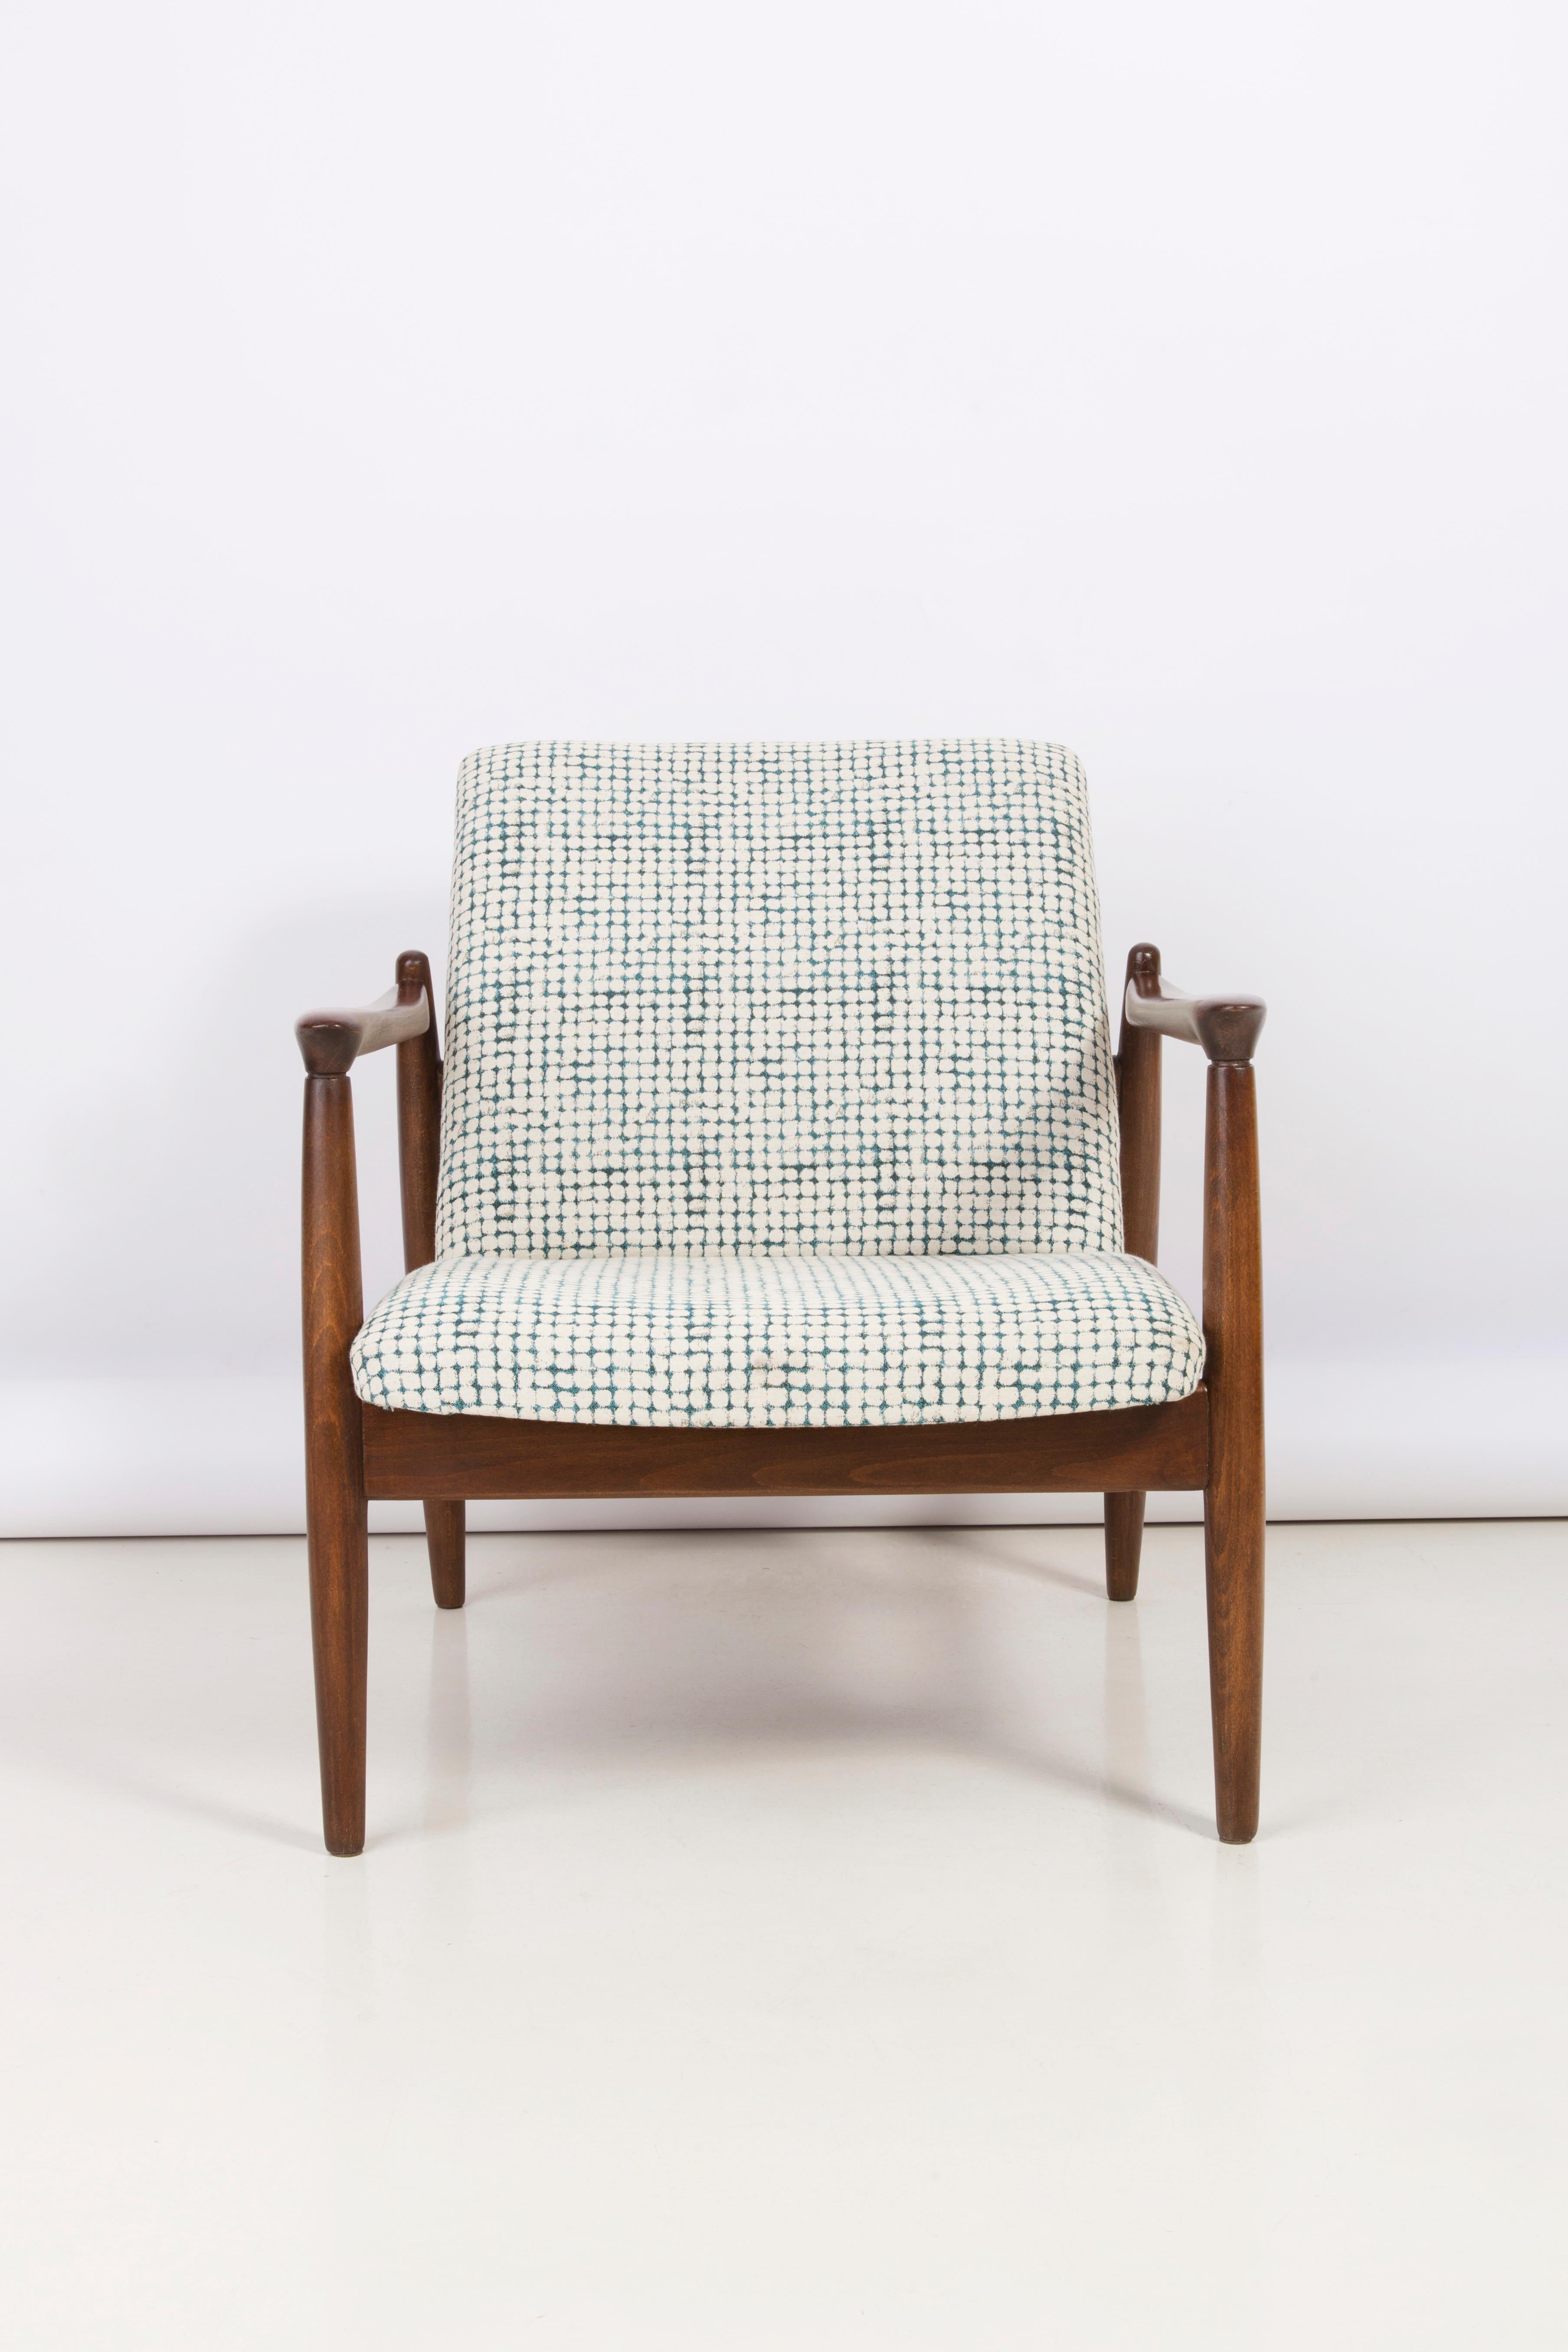 Mid-Century Modern White and Aqua Vintage Armchair and Stool, Edmund Homa, 1960s For Sale